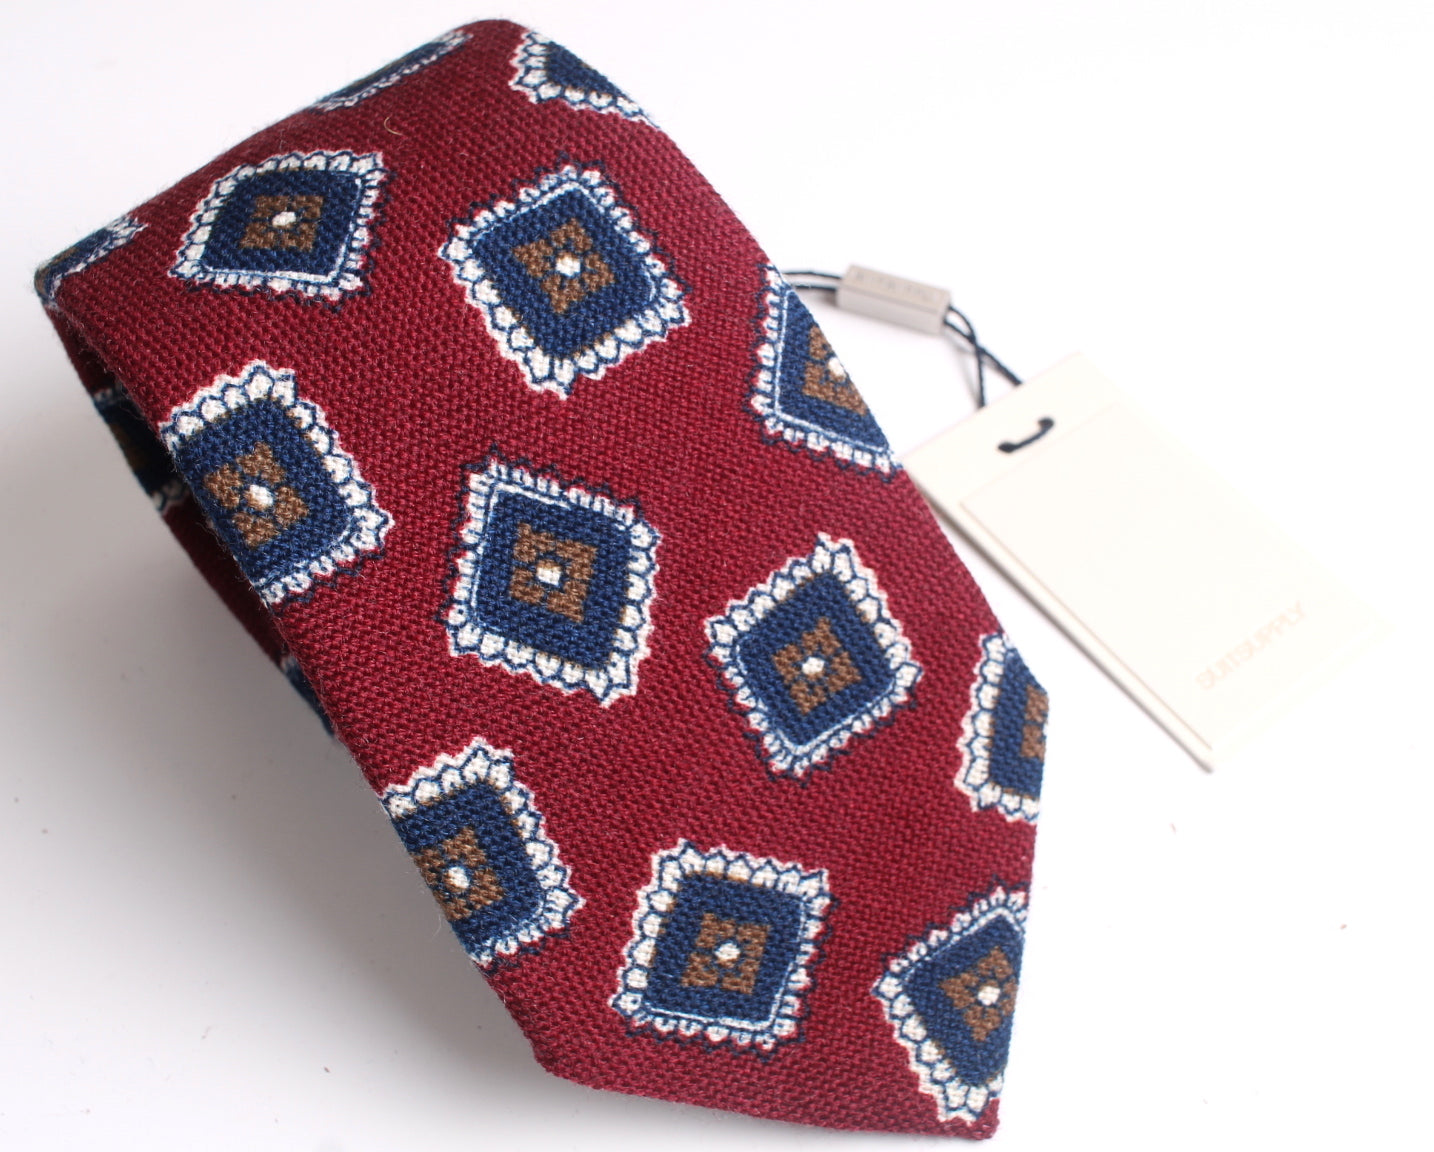 New SUITSUPPLY Burgundy Graphic Tie